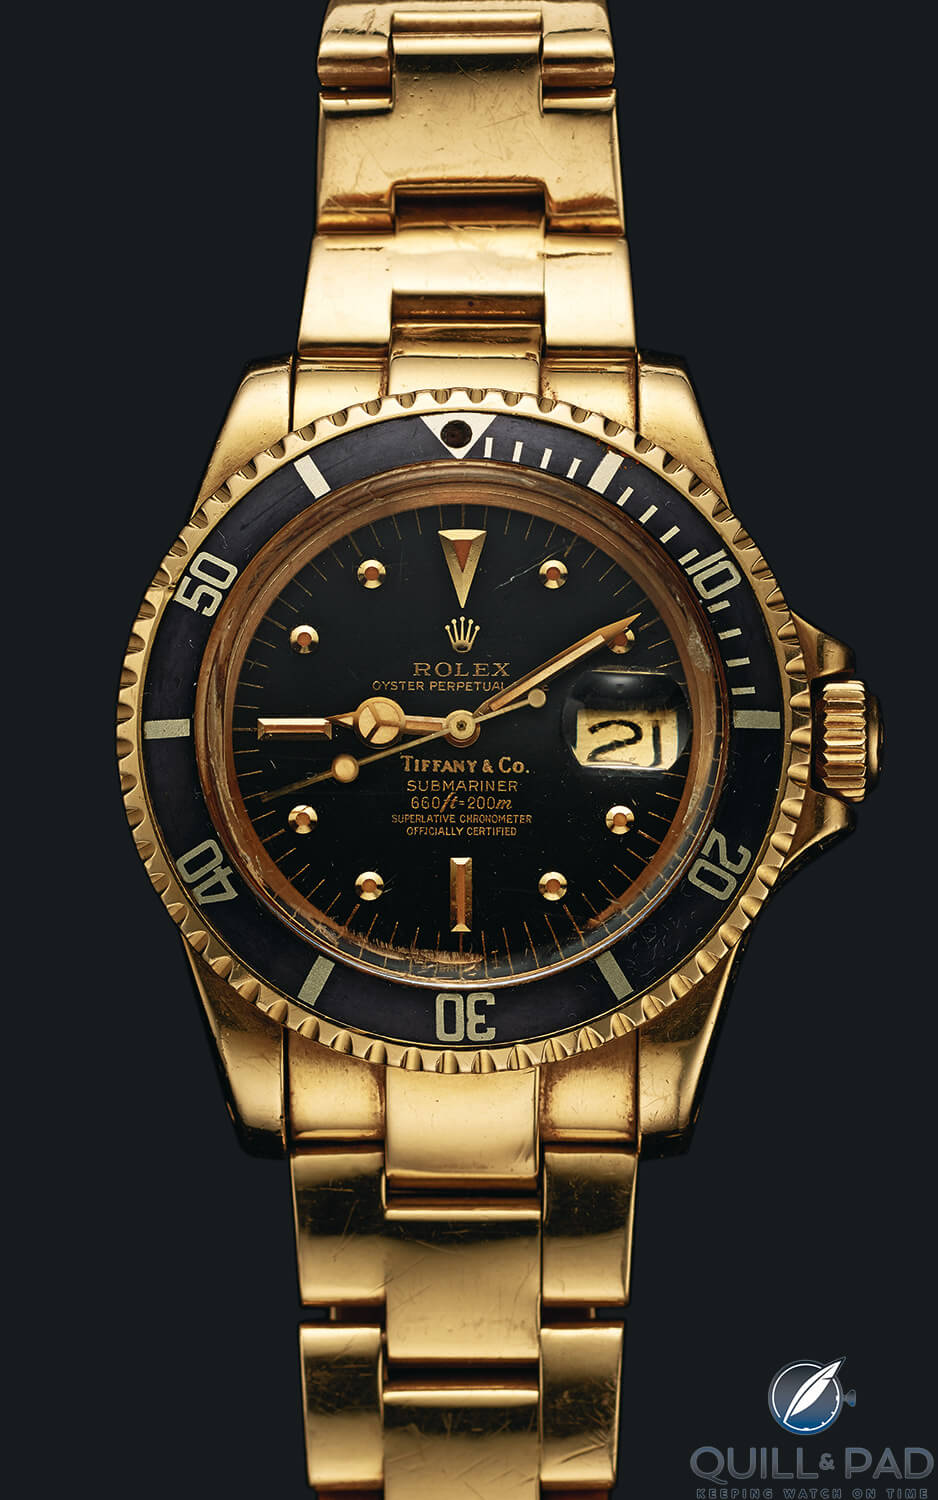 Tiffany Rolex Submariner Reference 1680 owned by Sylvester Stallone (excerpted from 'A Man and His Watch' by Matt Hranek, Artisan Books, copyright © 2017; photographs by Stephen Lewis)